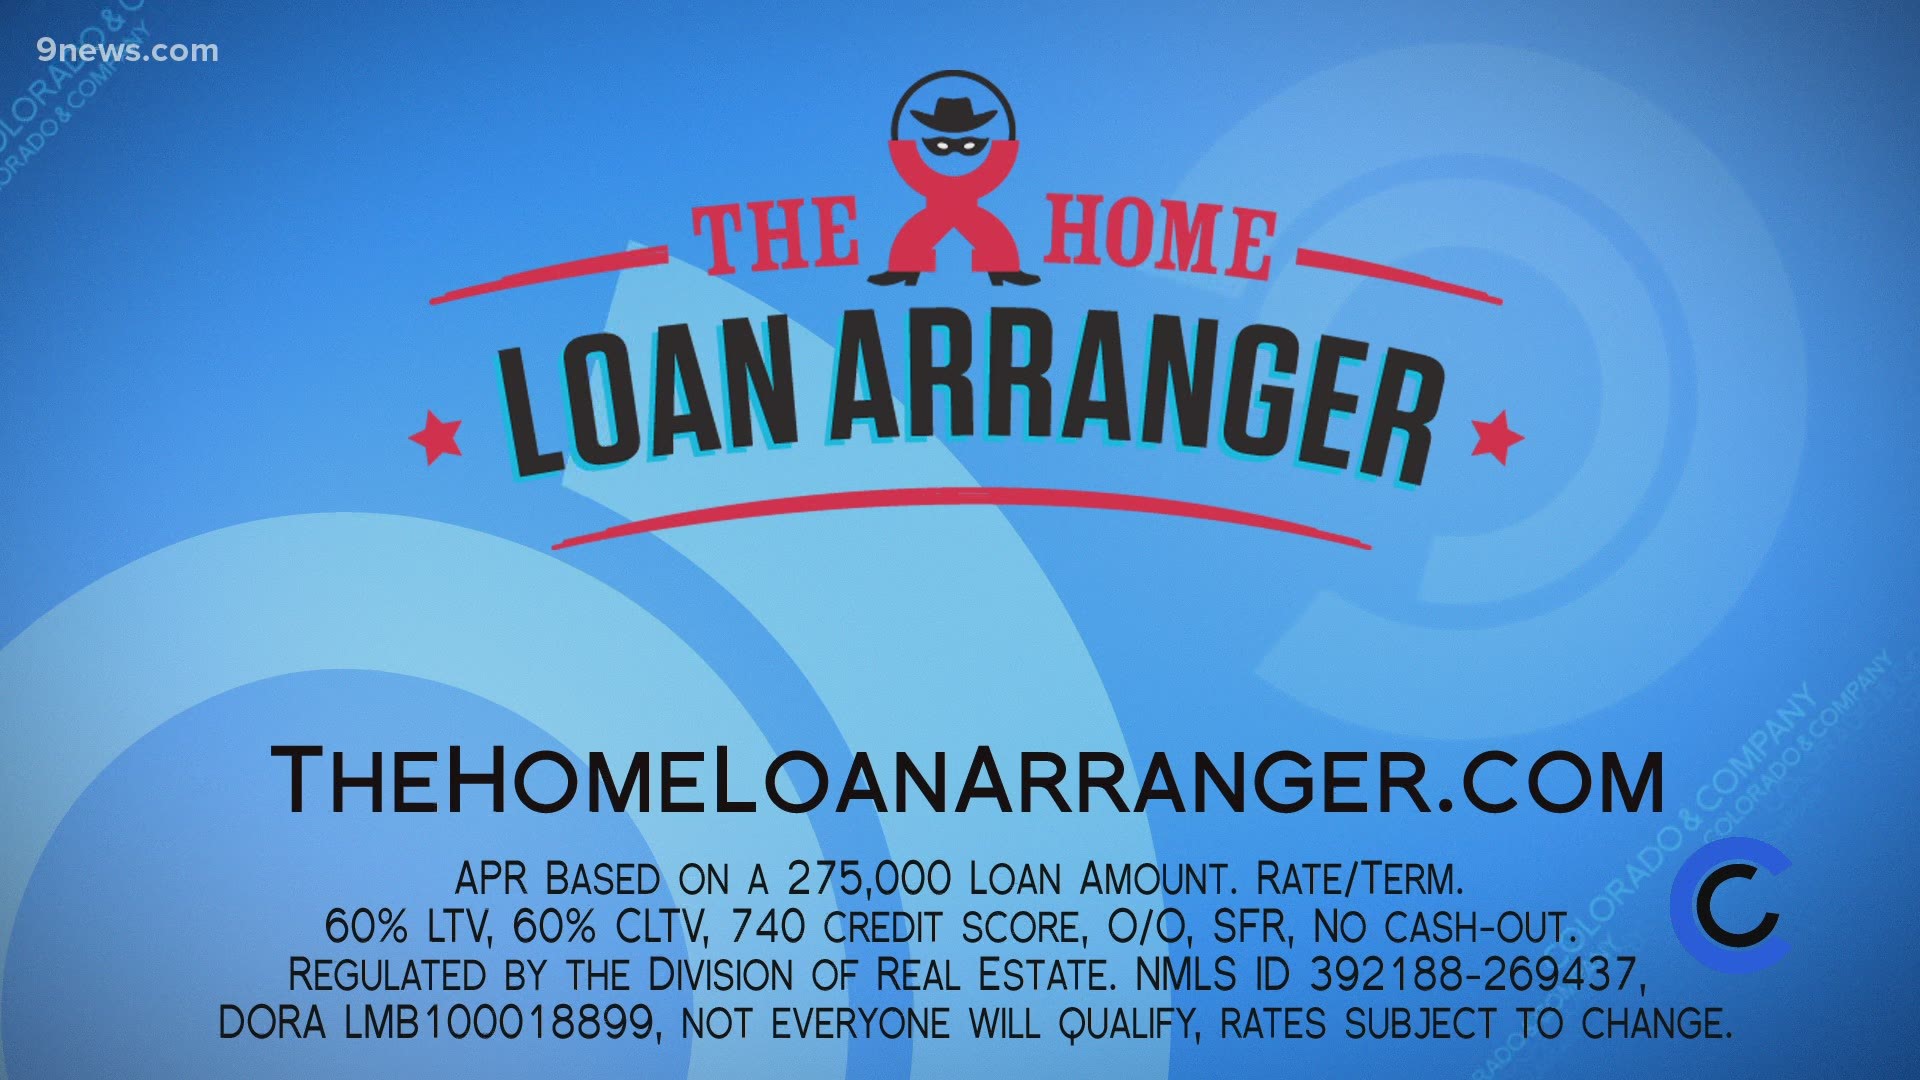 Call 303.862.4742 or visit TheHomeLoanArranger.com to learn how you can skip up to two mortgage payments and refinance at historically low rates.